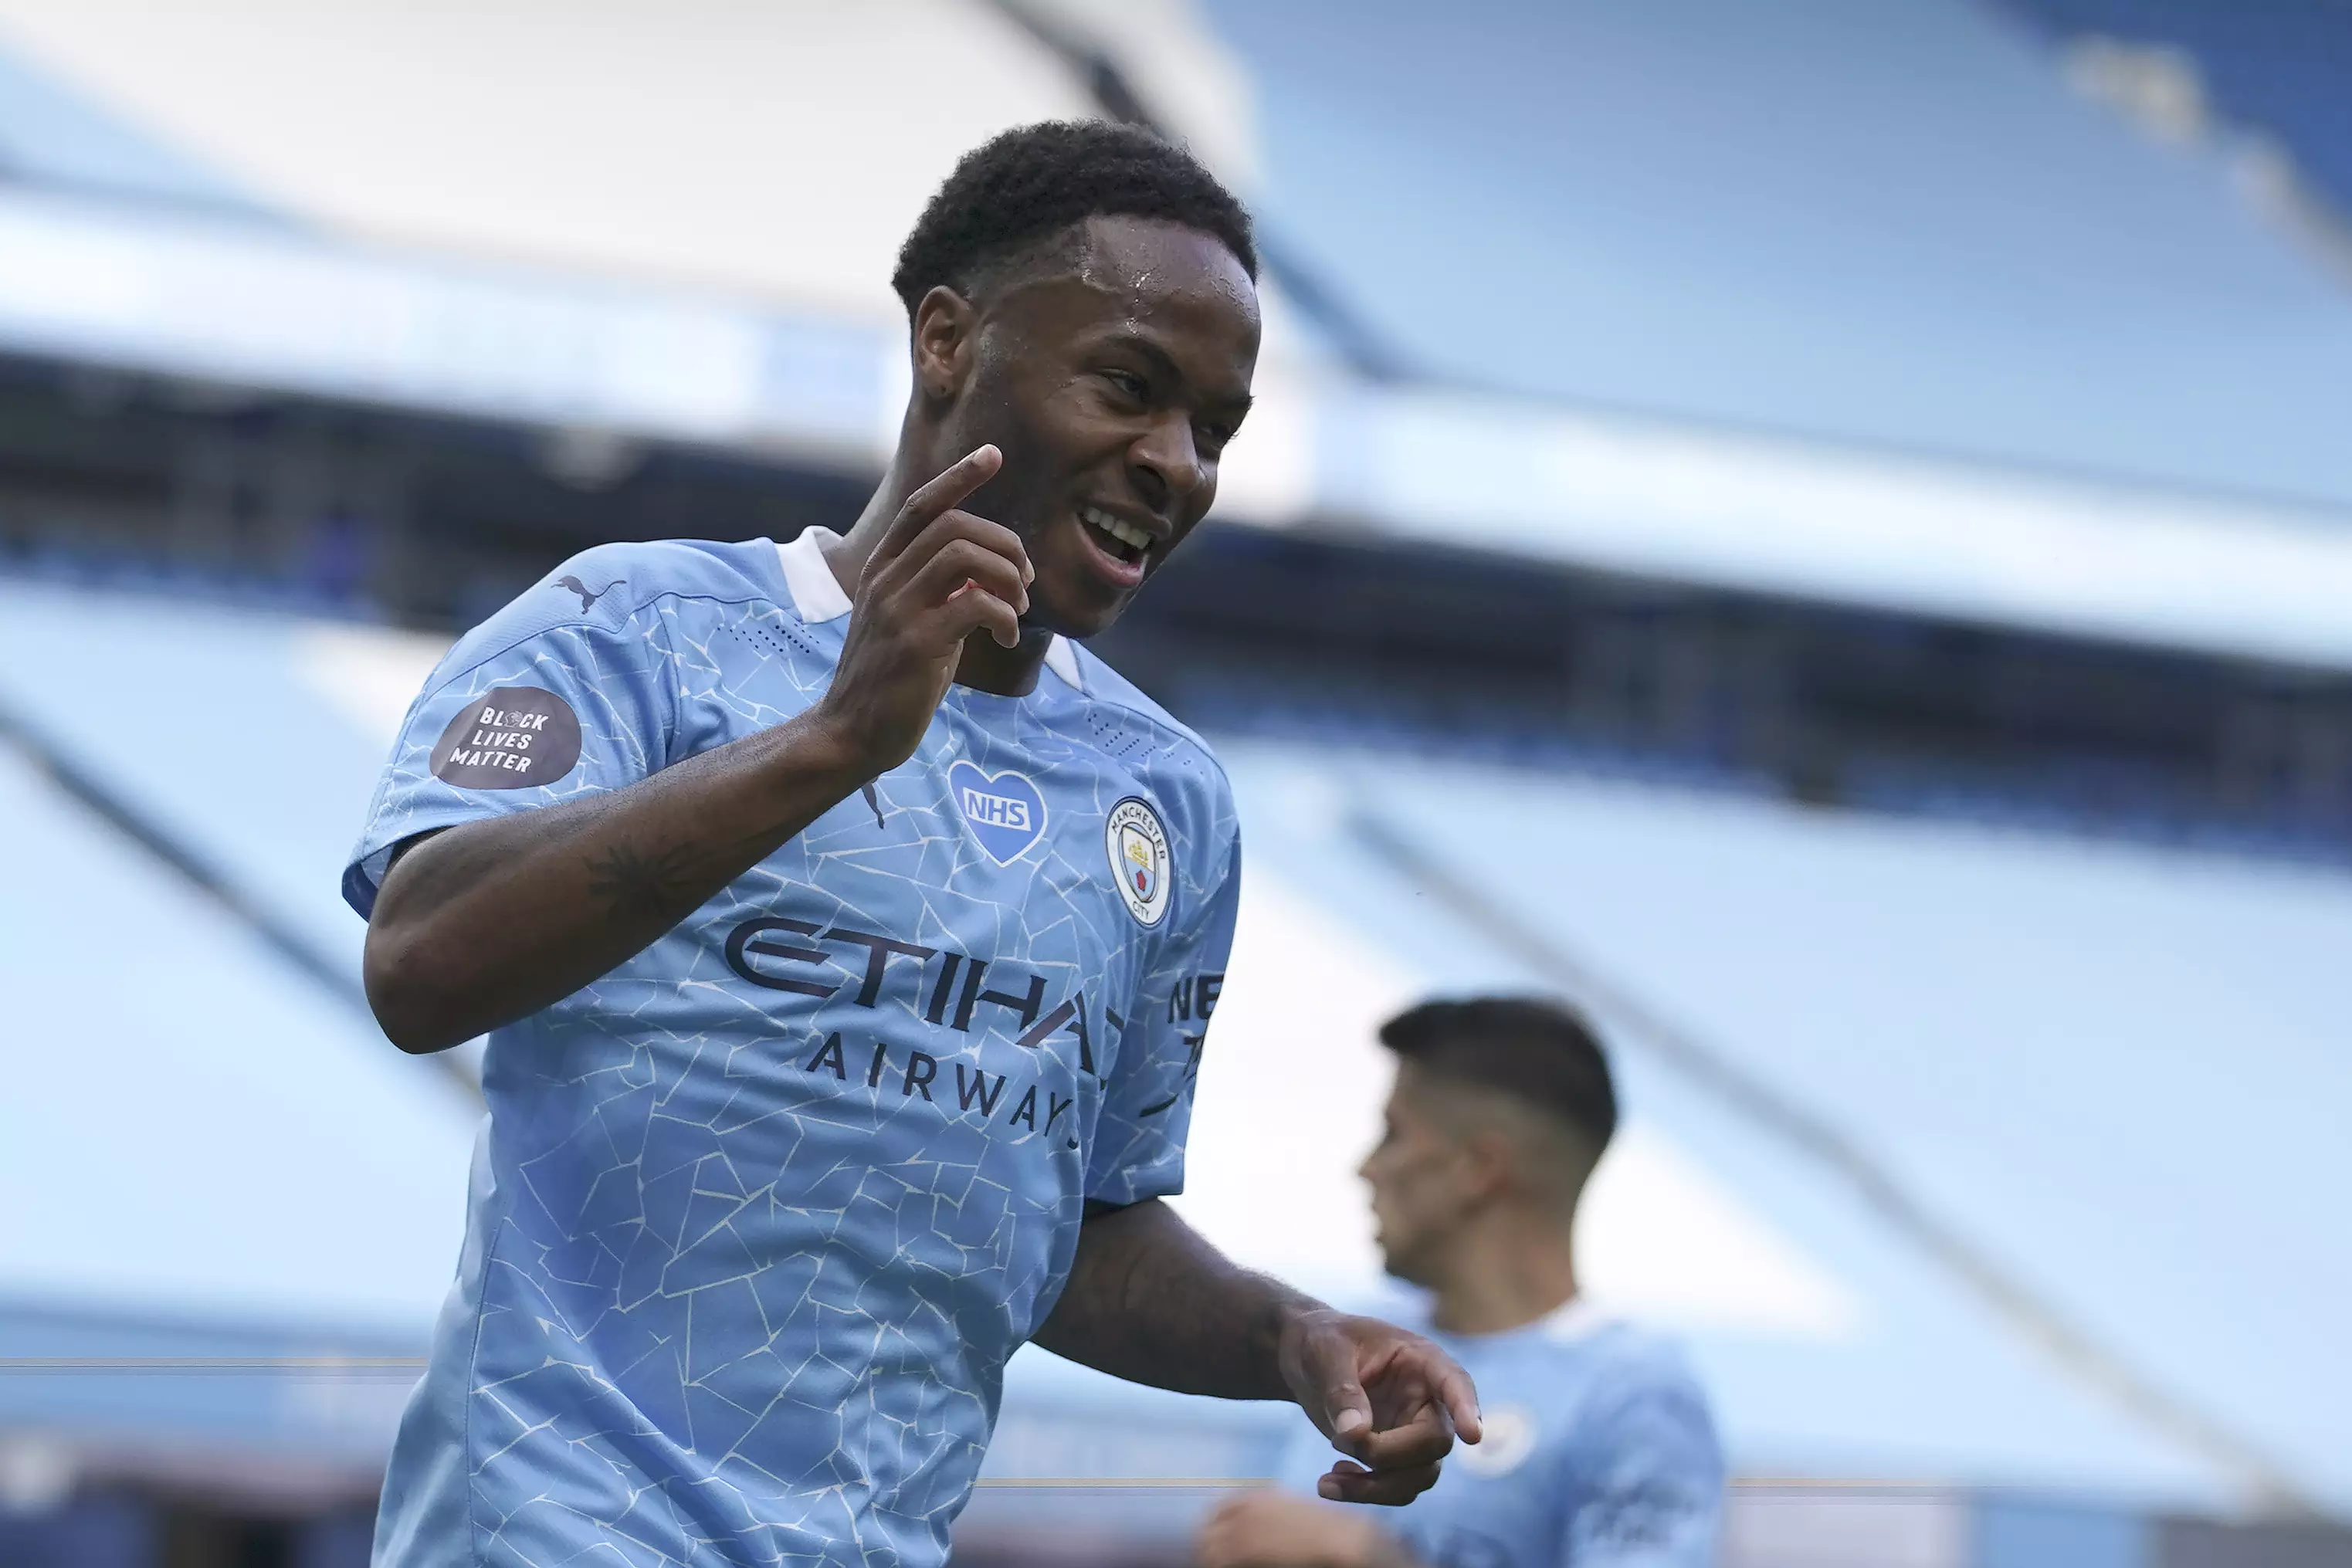 Sterling celebrates scoring against Norwich on the last day of the season. Image: PA Images